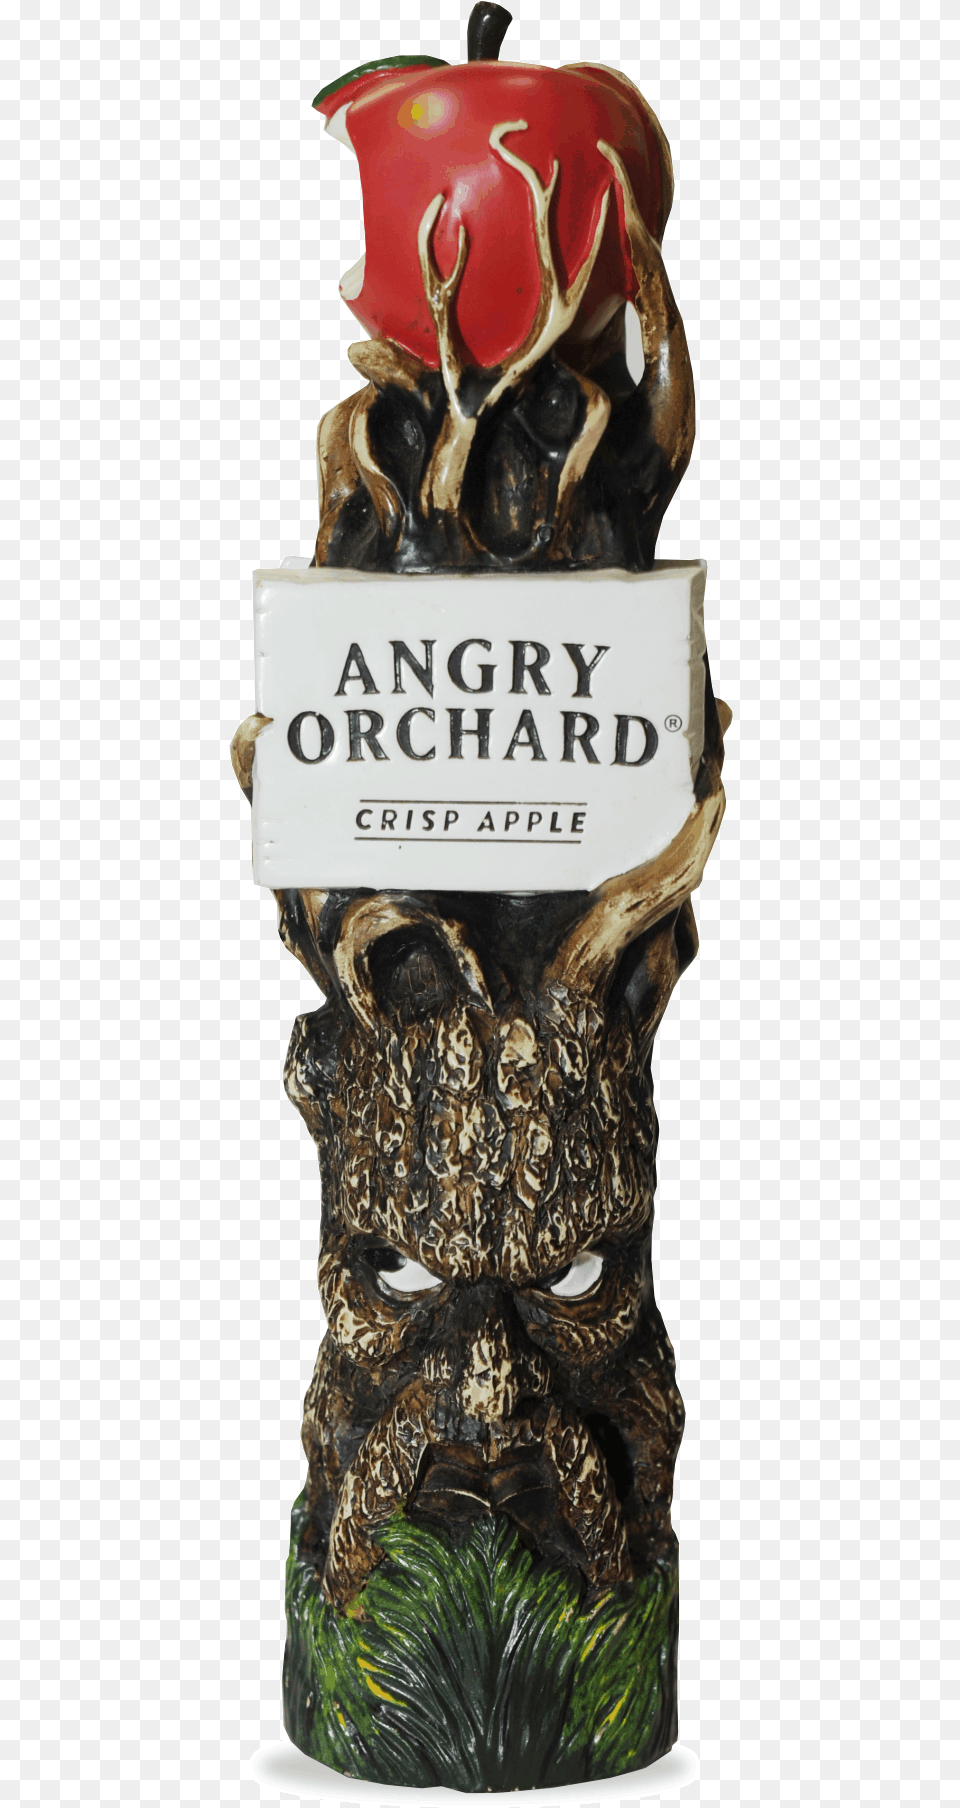 Angry Orchard Crisp Apple Angry Orchard Crisp Apple Angry Orchard Cider 12 Pack 12 Fl Oz Cans, Emblem, Symbol, Figurine, Architecture Png